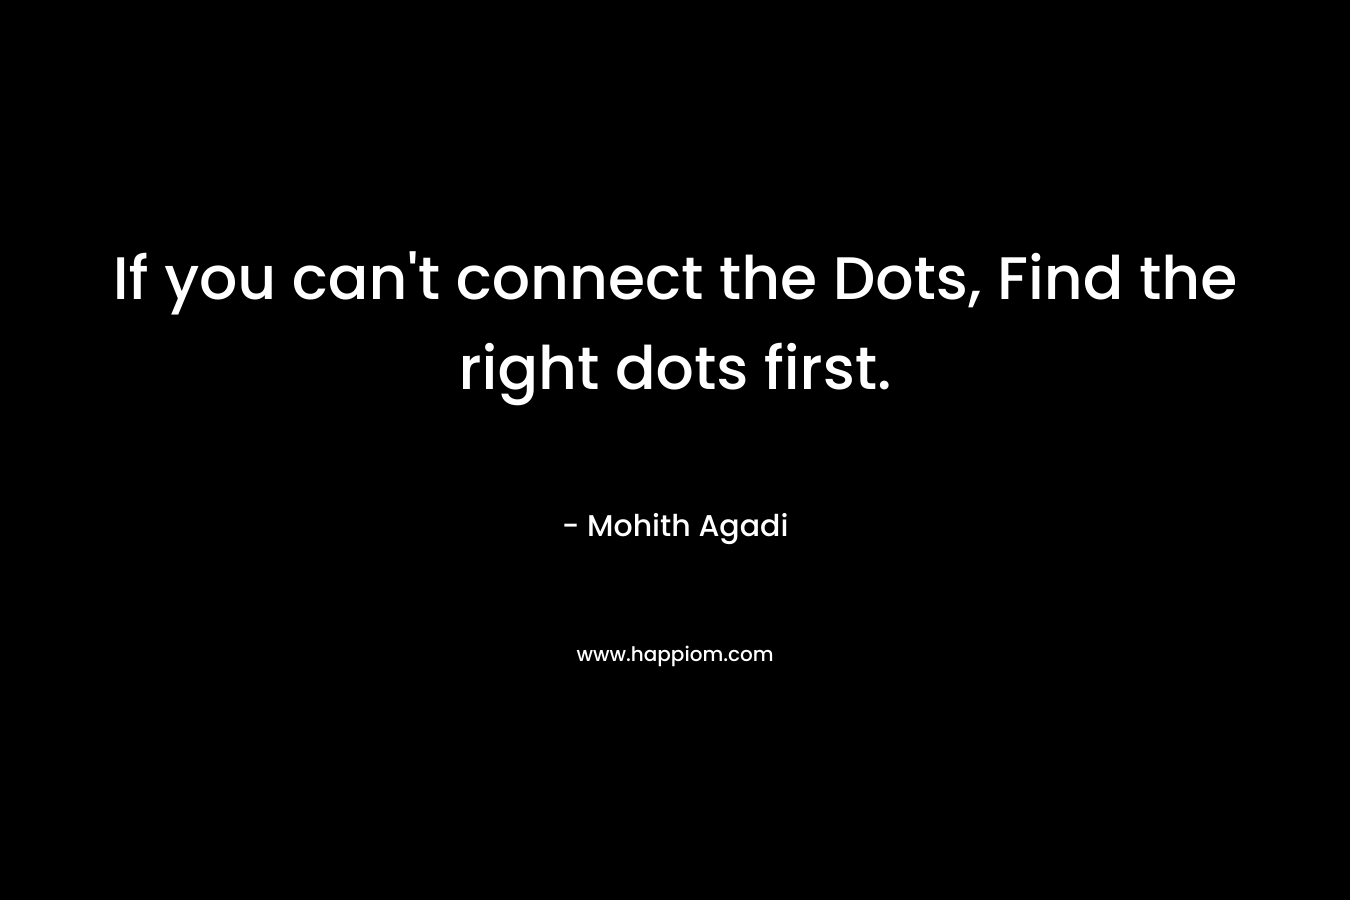 If you can't connect the Dots, Find the right dots first.